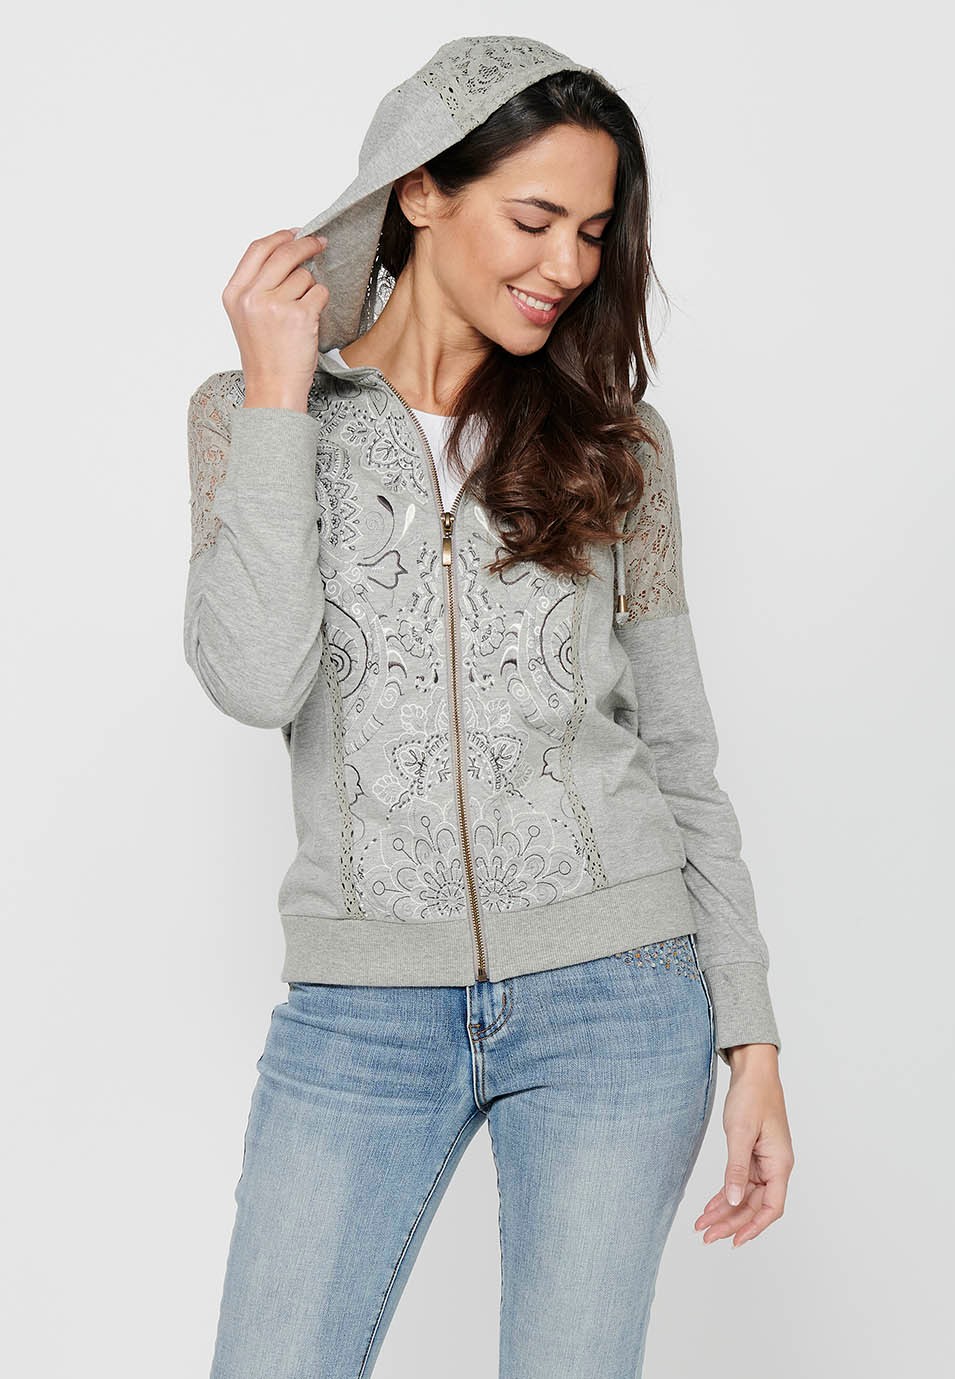 Sweatshirt jacket with zipper front closure and lace details with gray hooded collar for women